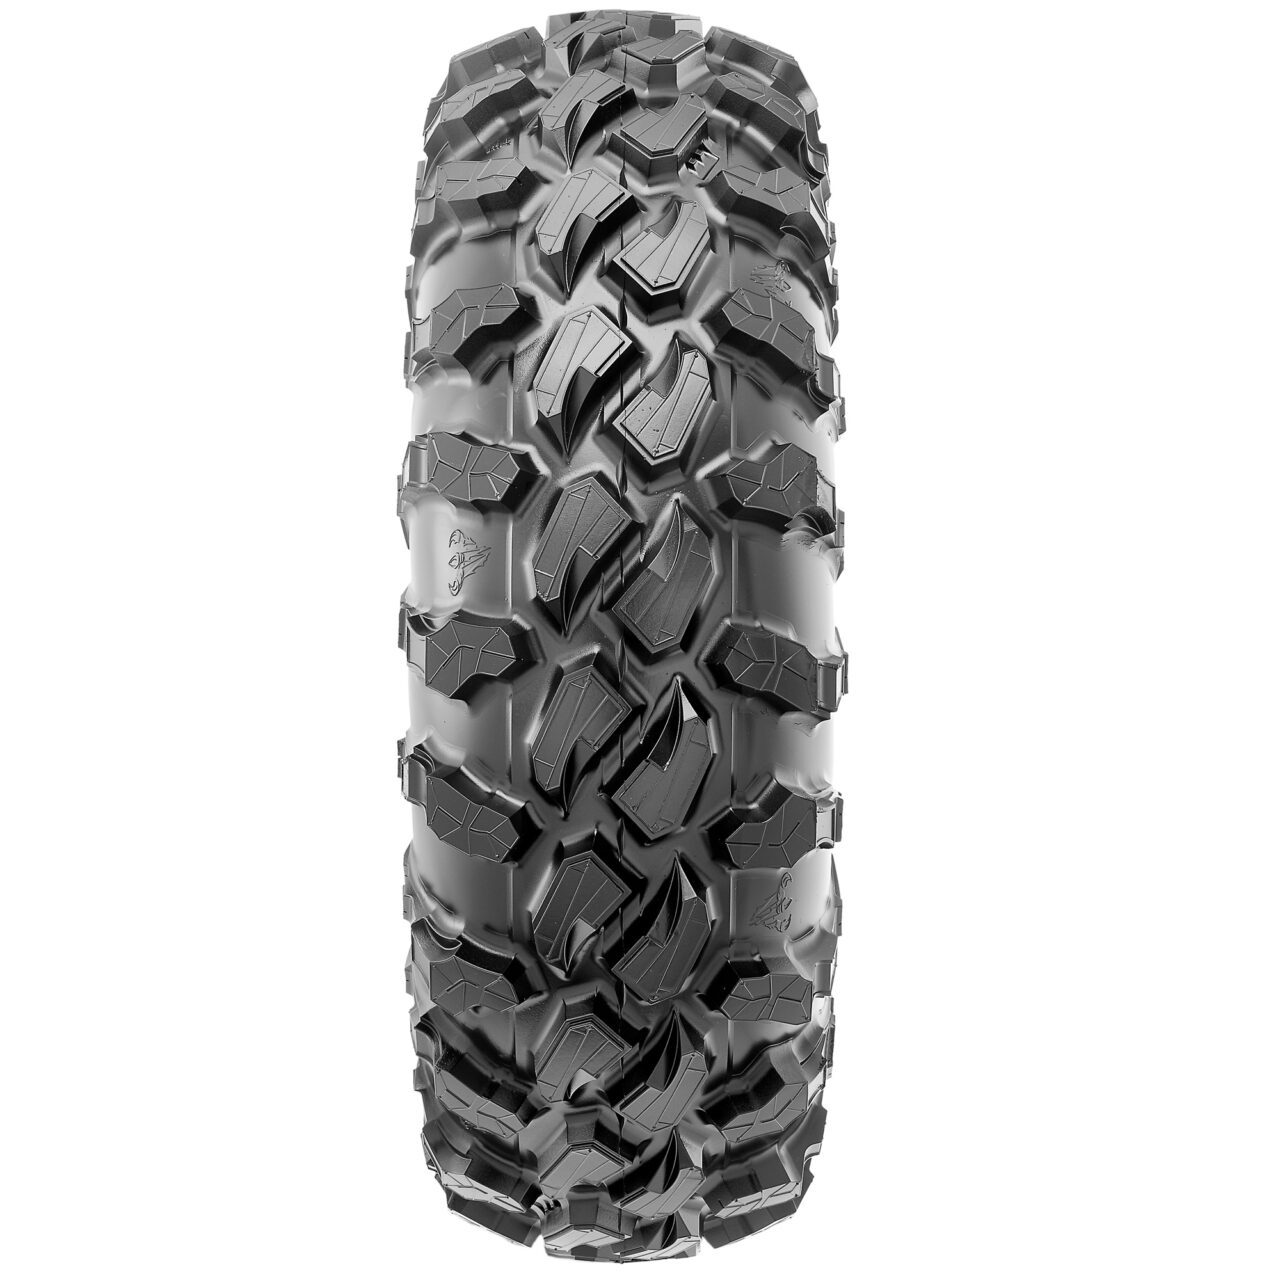 Maxxis Carnage SxS tire